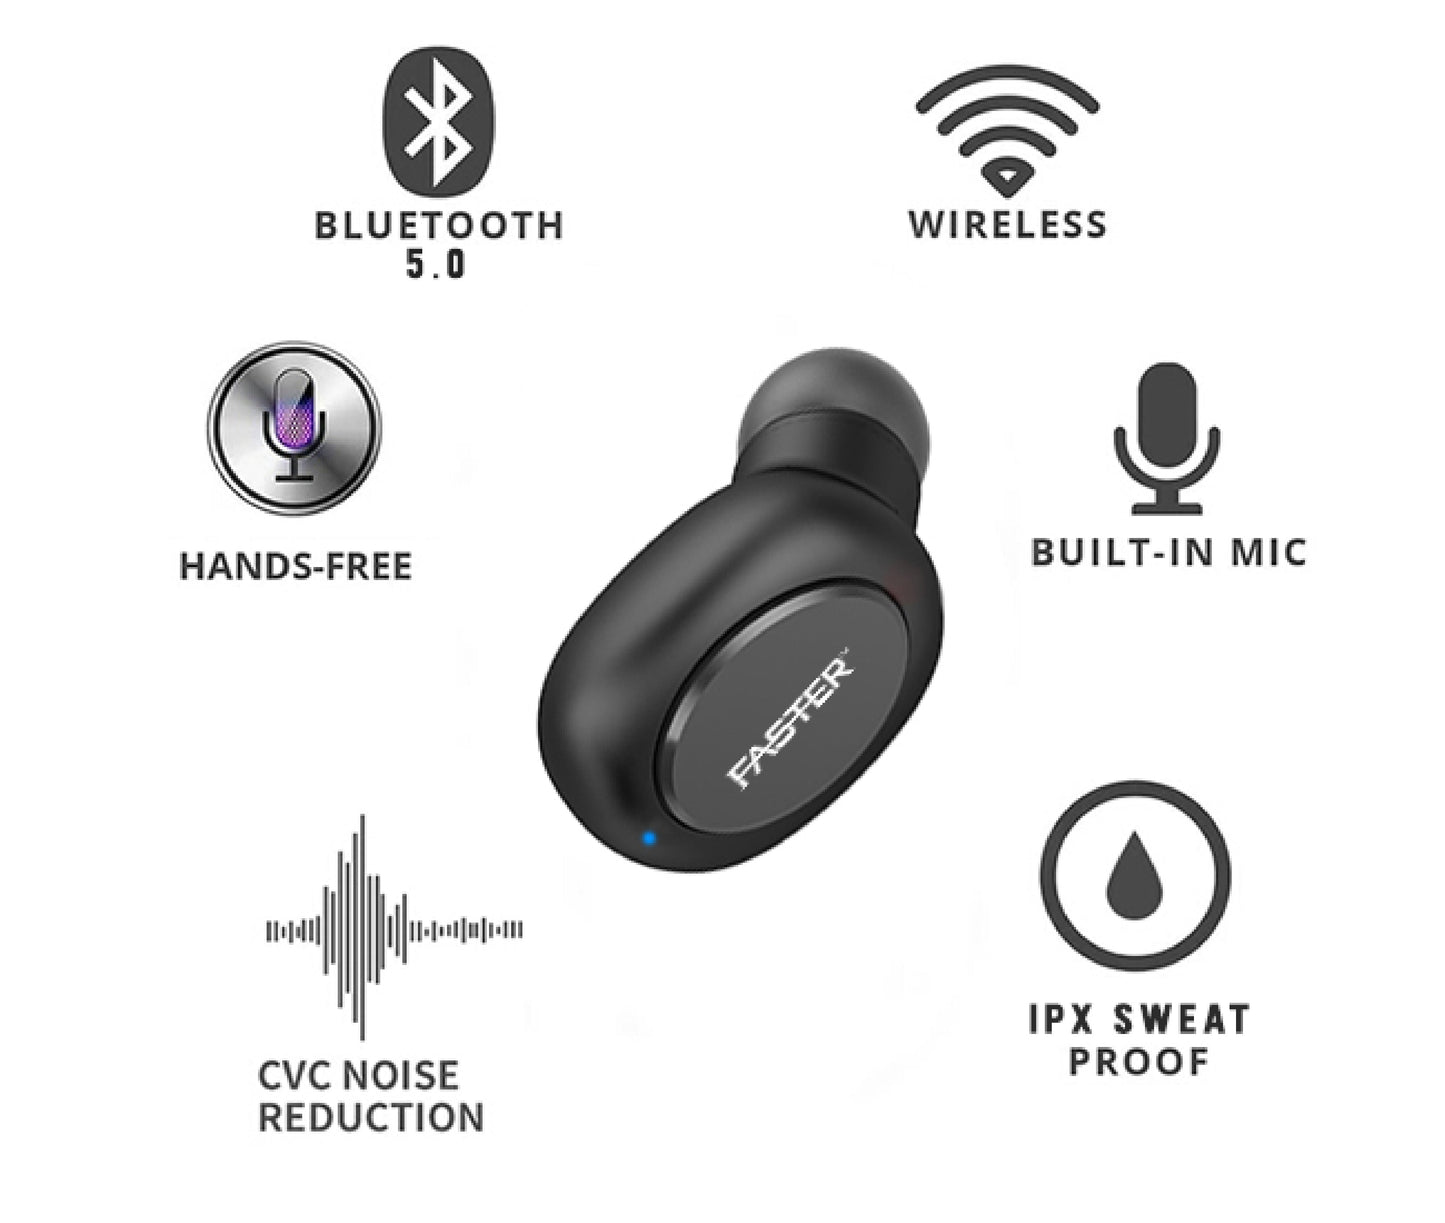 FASTER S600 TWS Stereo Earbuds with Power Box